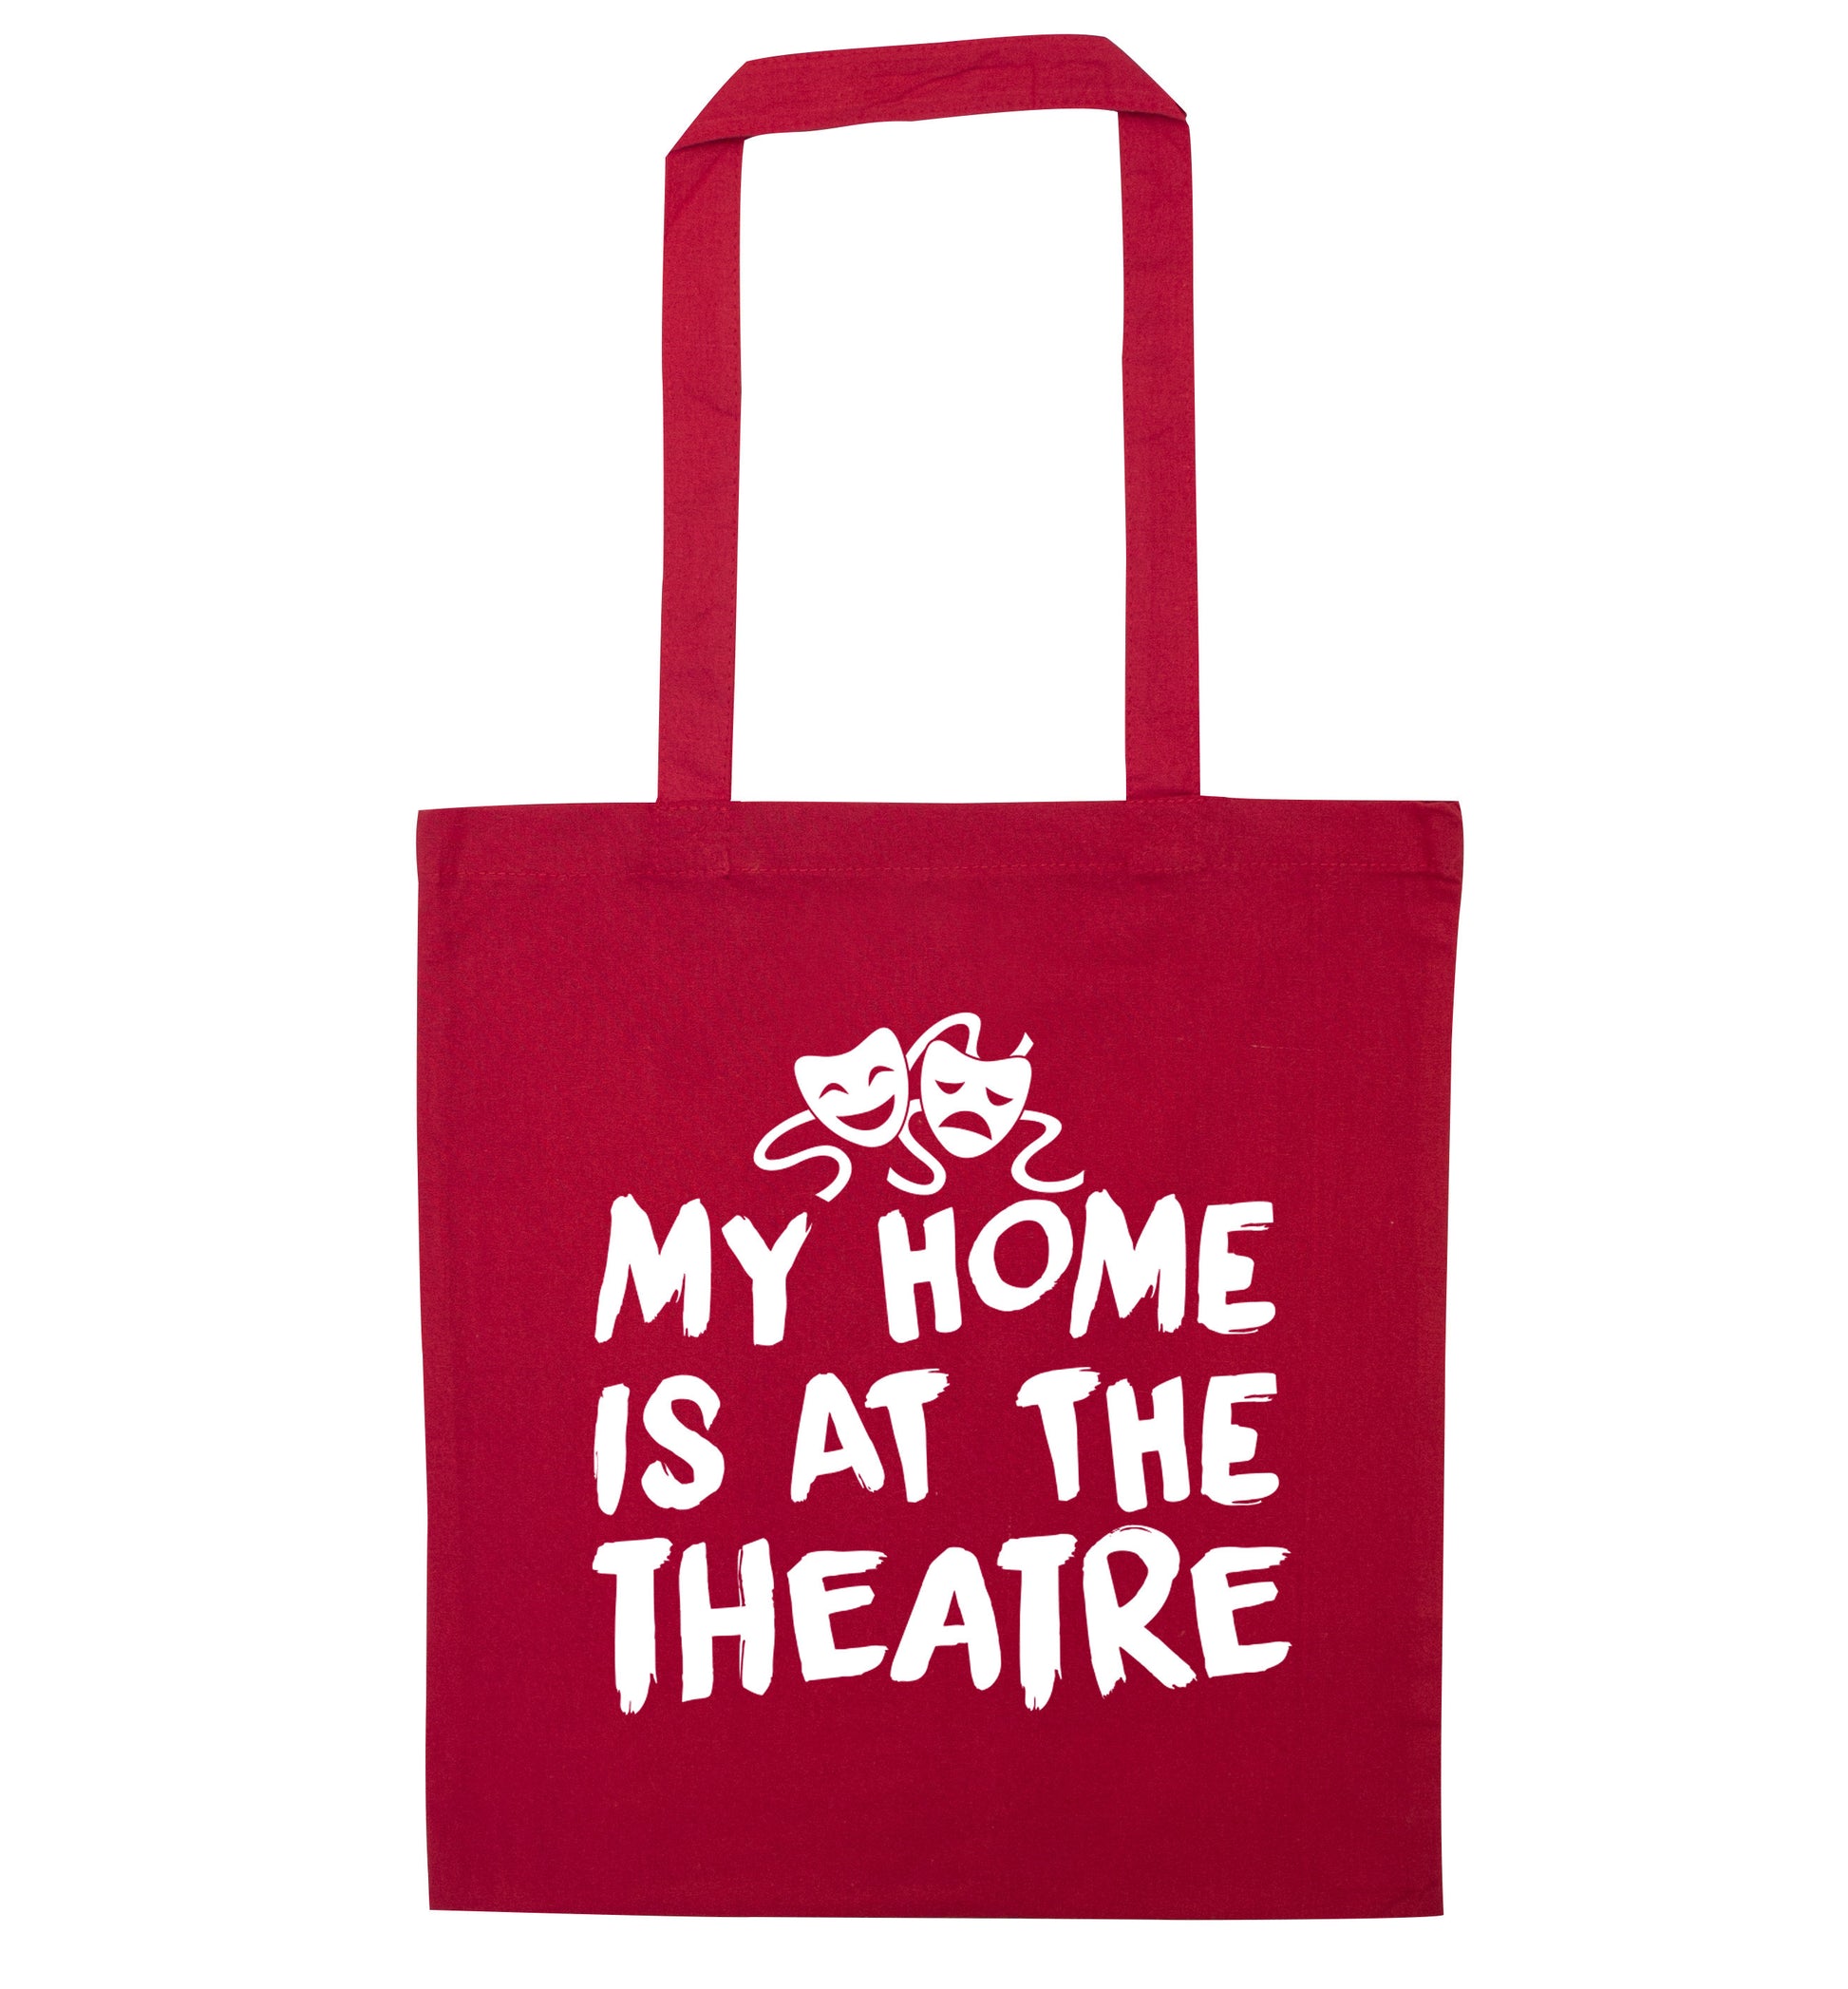 My home is at the theatre red tote bag